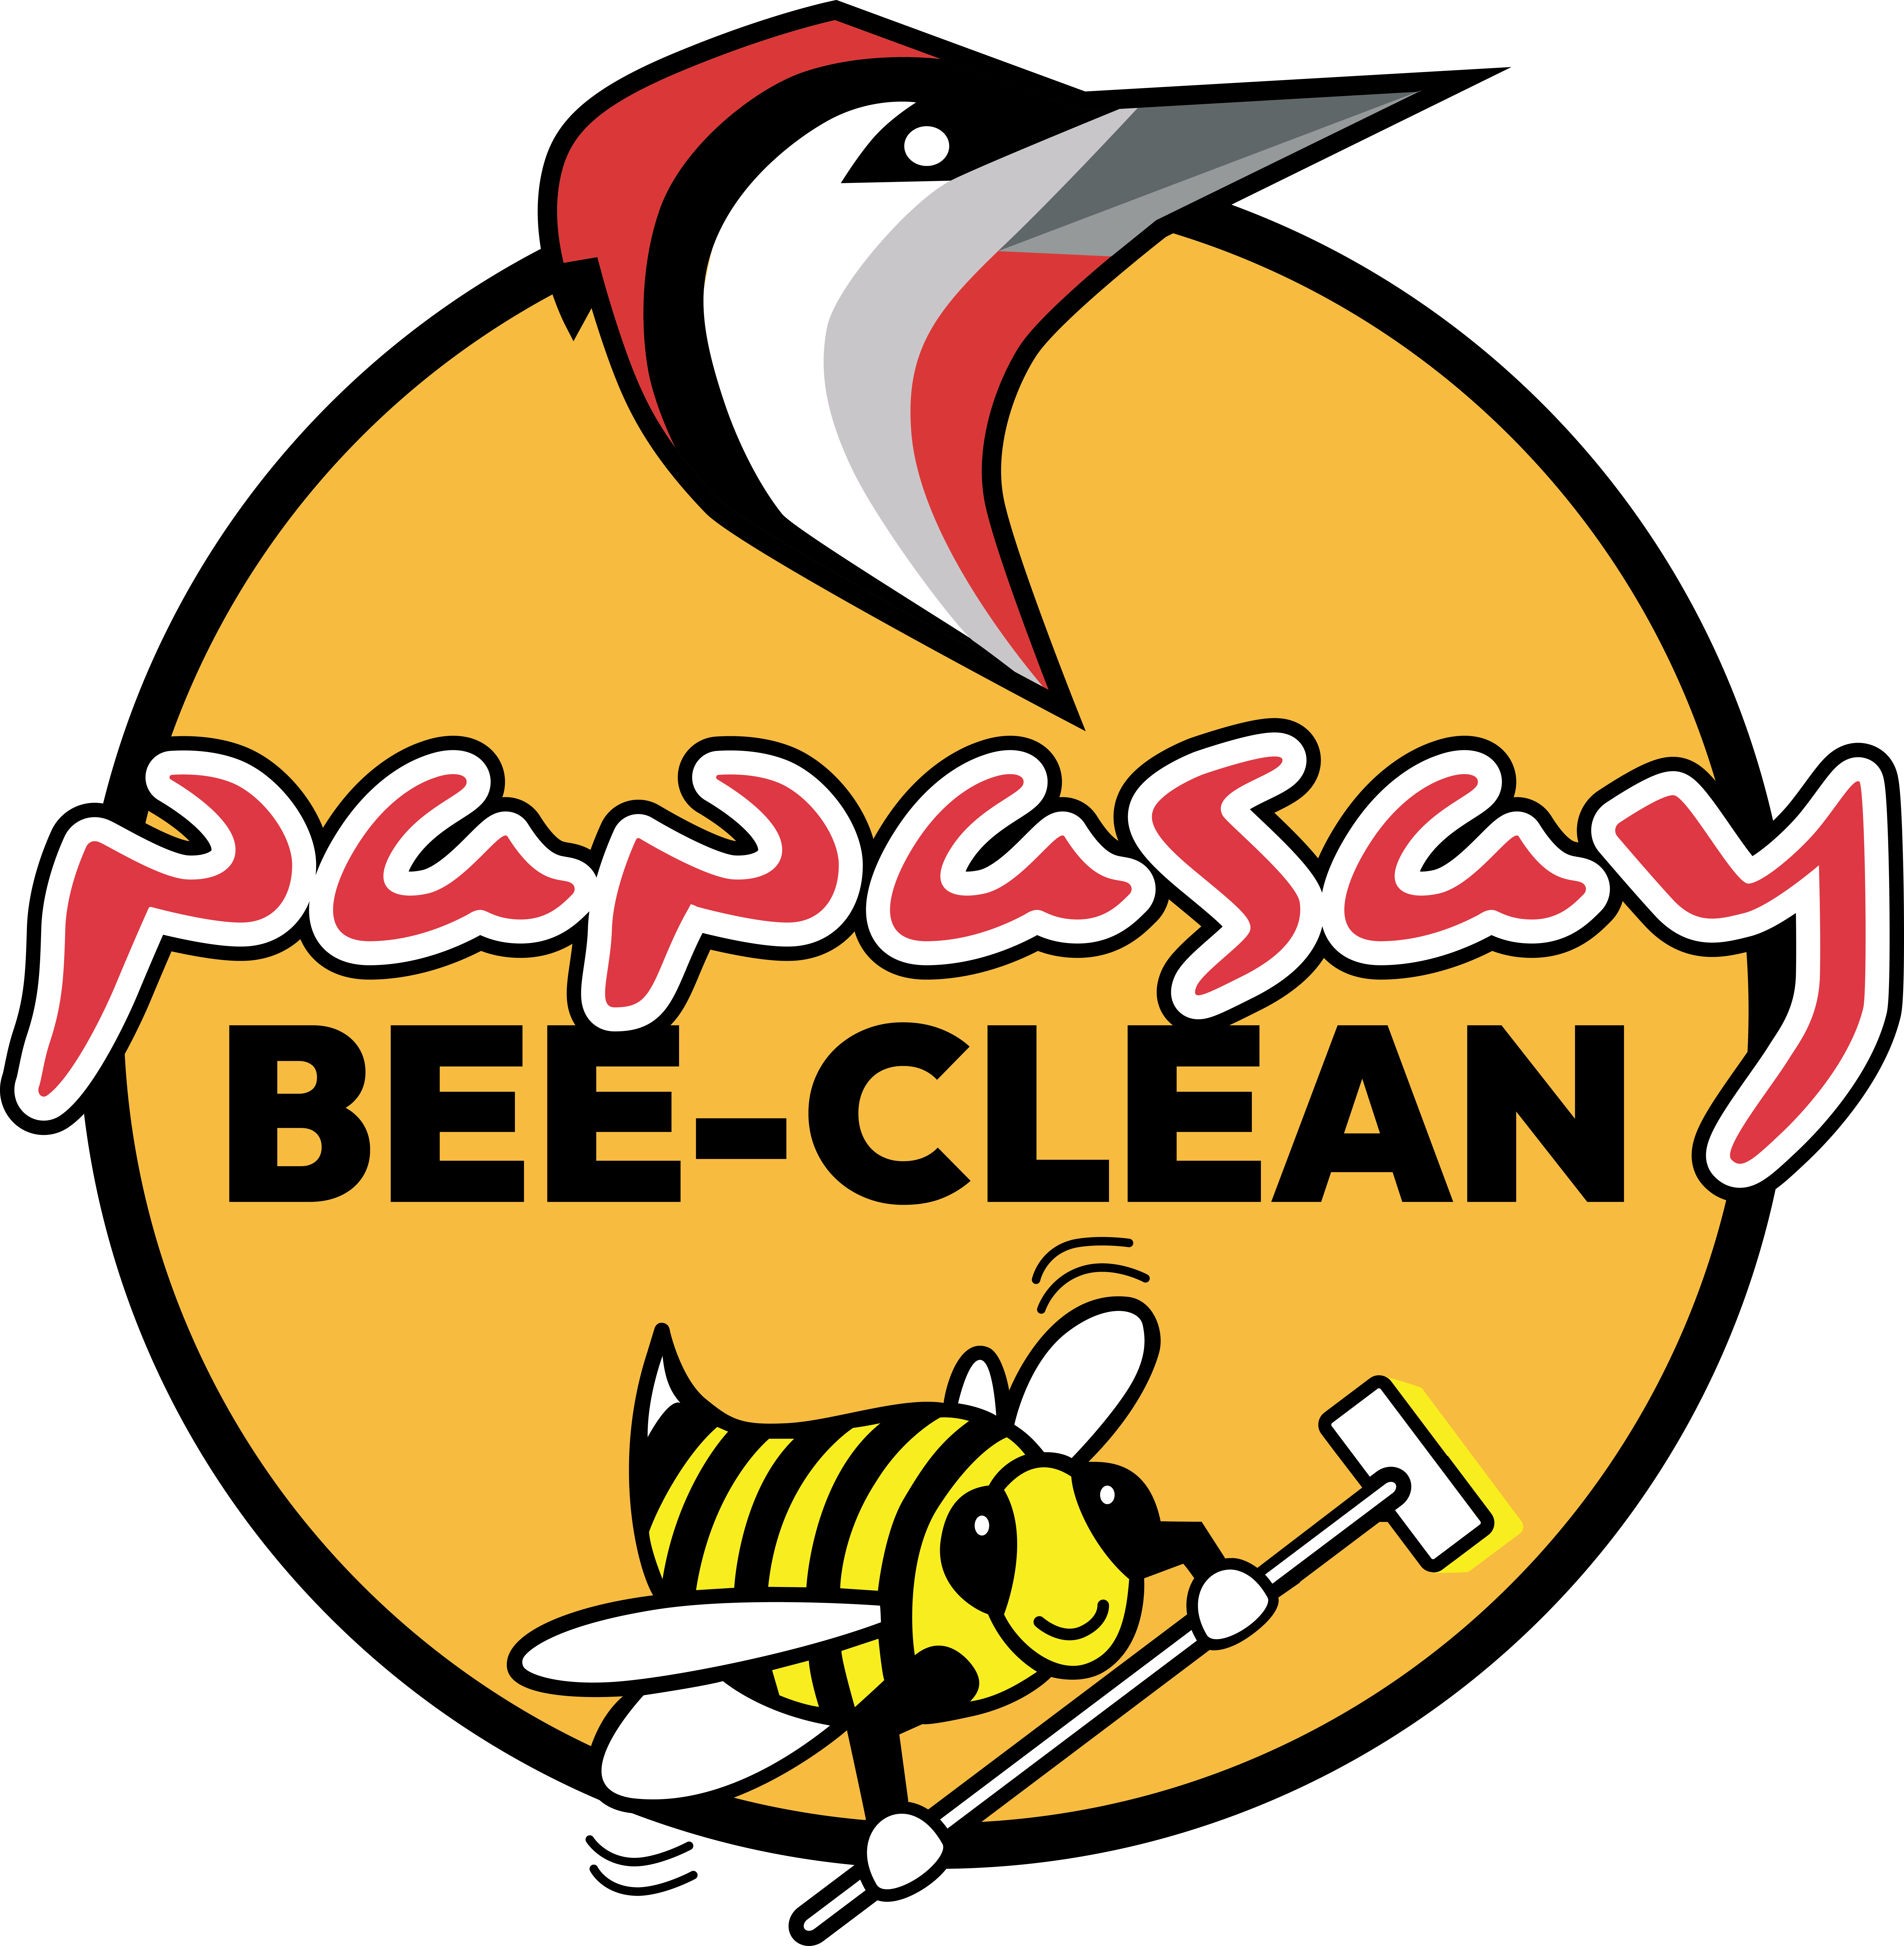 Papasay Bee-Clean logo - full colour transparent background